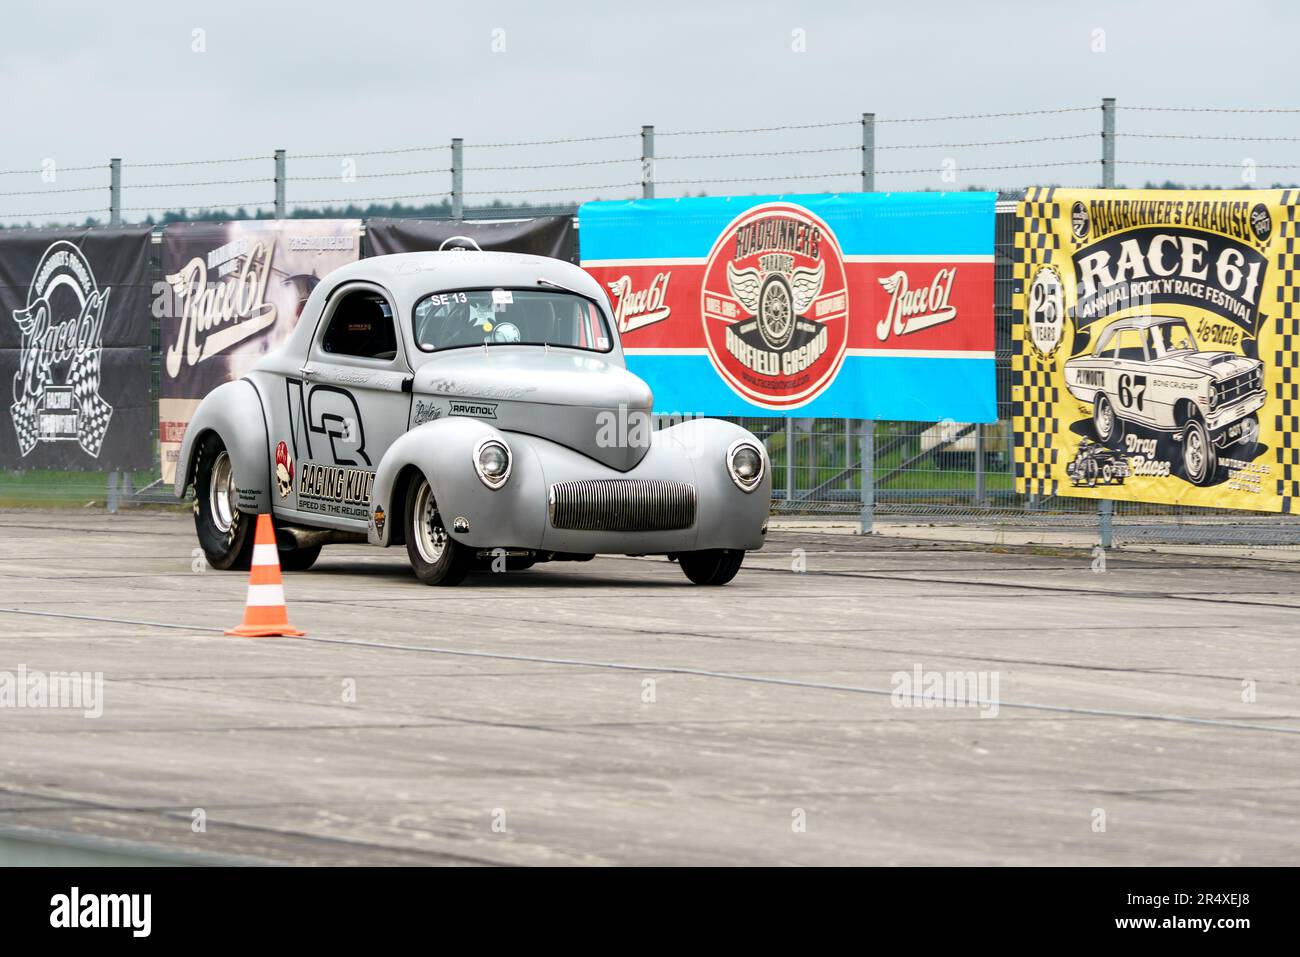 FINOWFURT, GERMANY - MAY 06, 2023: The Hot Rod 1941 Willys Coupe by Micha 'Fullspeed' Vogt. Race festival 2023. Season opening. Stock Photo